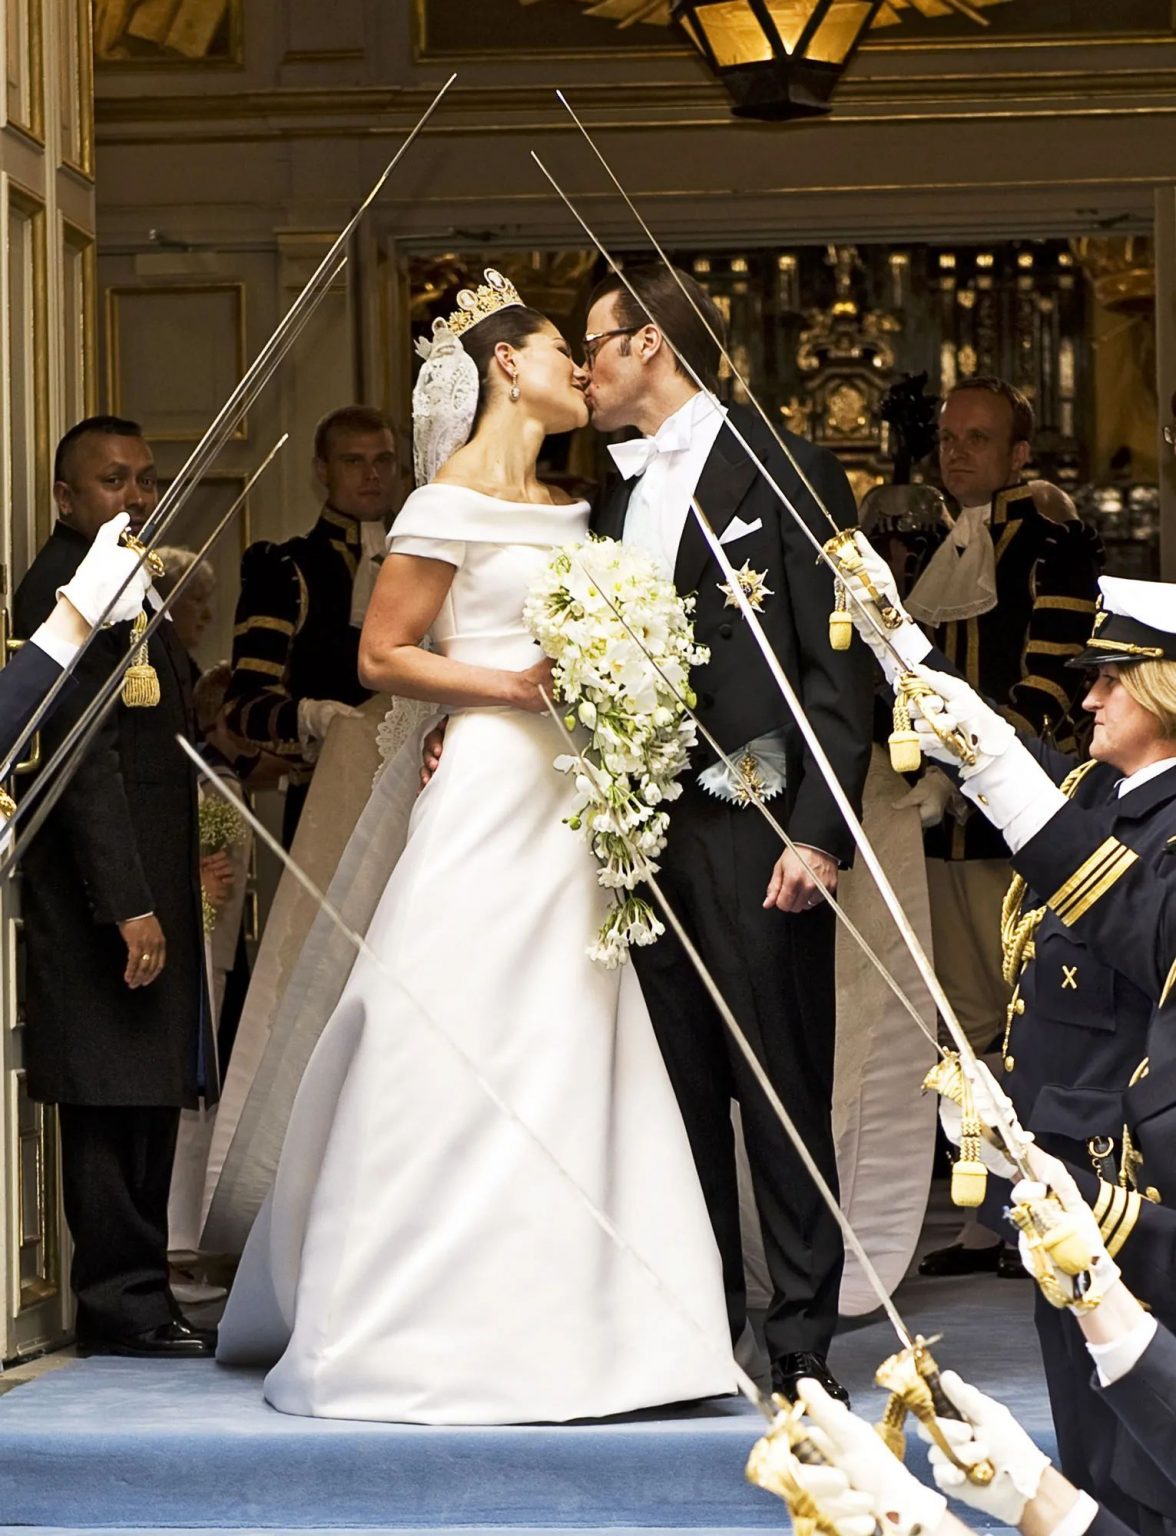 Most Memorable Royal Kisses Caught on Camera 8 1176x1536 1